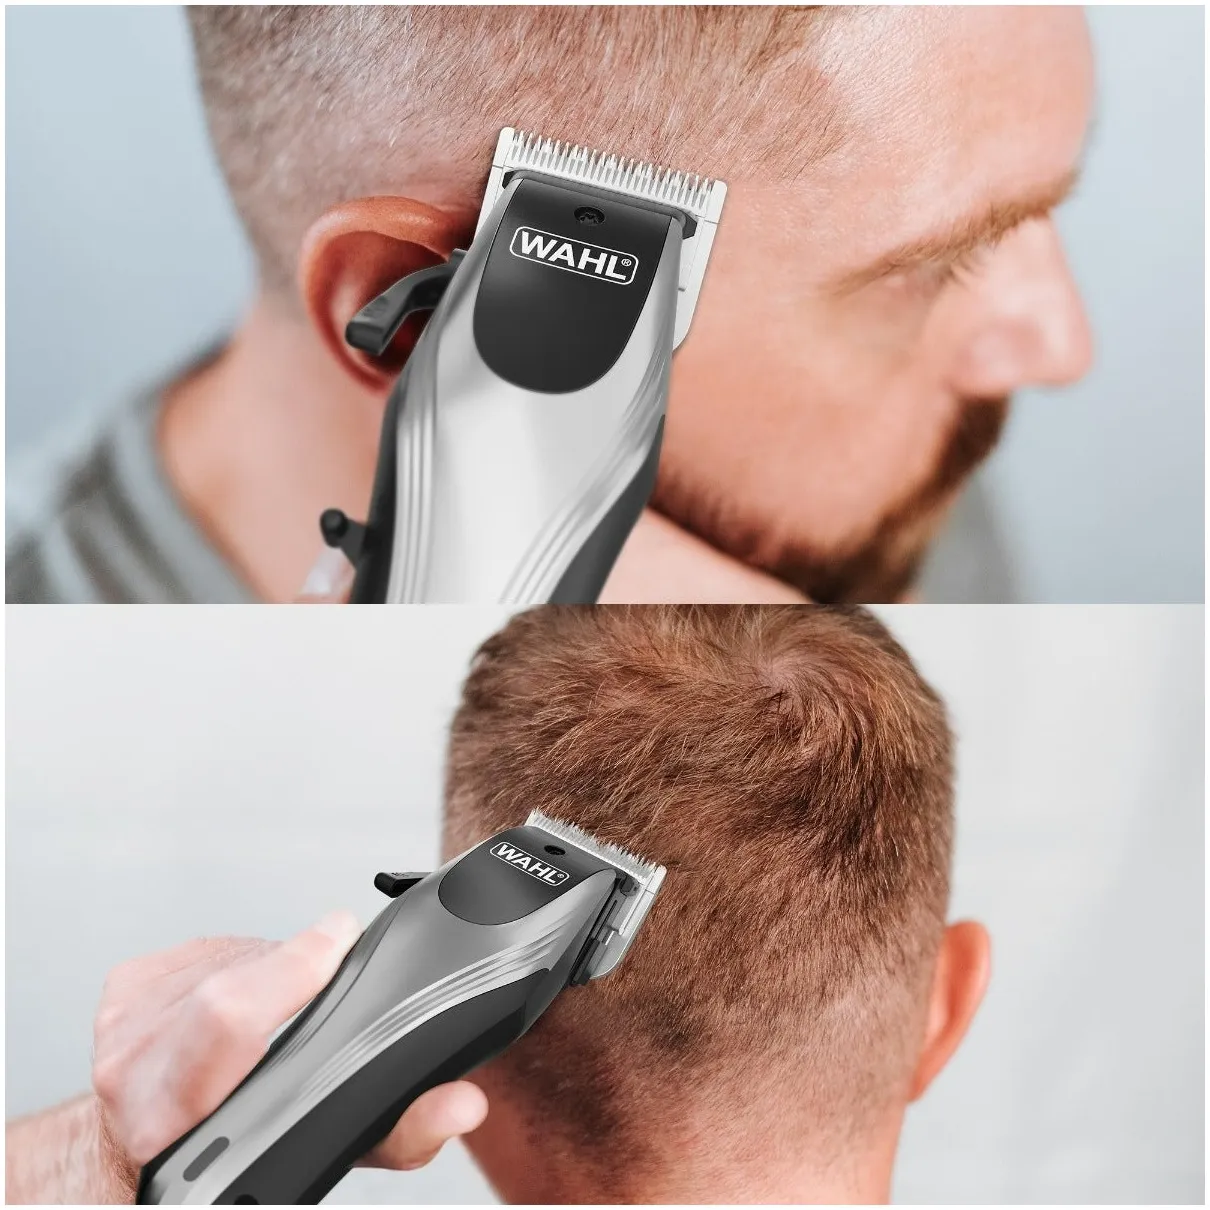 Wahl Tondeuse / Rapid Clipper / 33+ Kniplengtes, 0,7-28mm